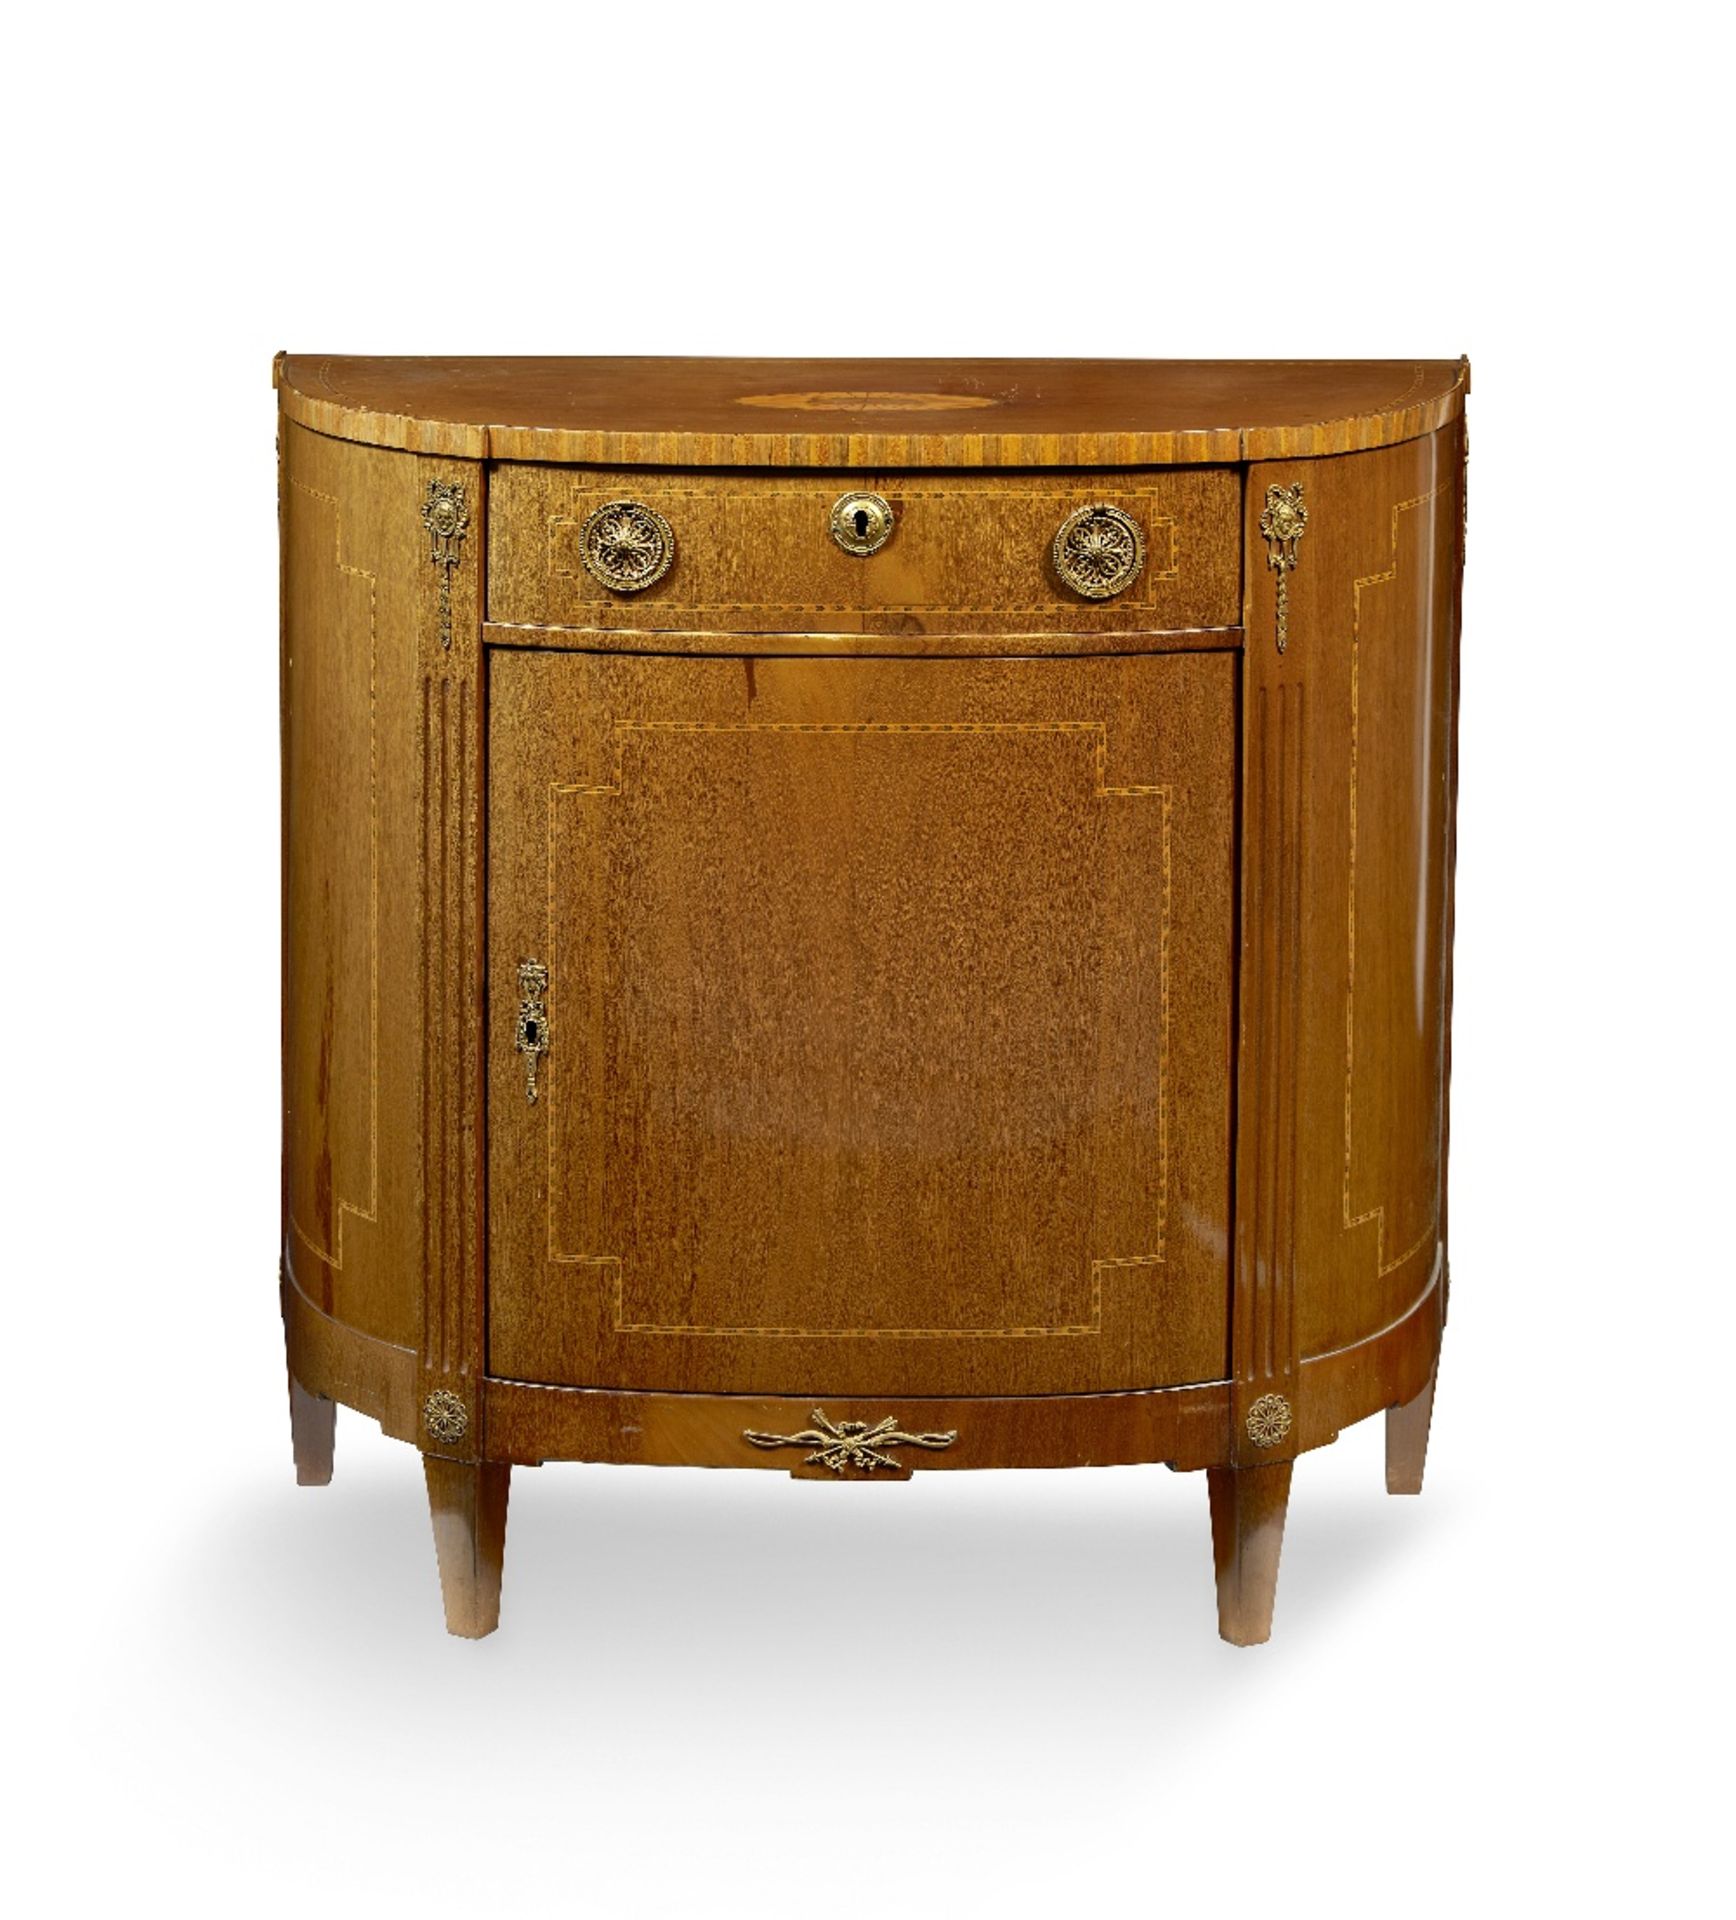 A Dutch 18th century mahogany, marquetry and gilt metal mounted demi-lune commode